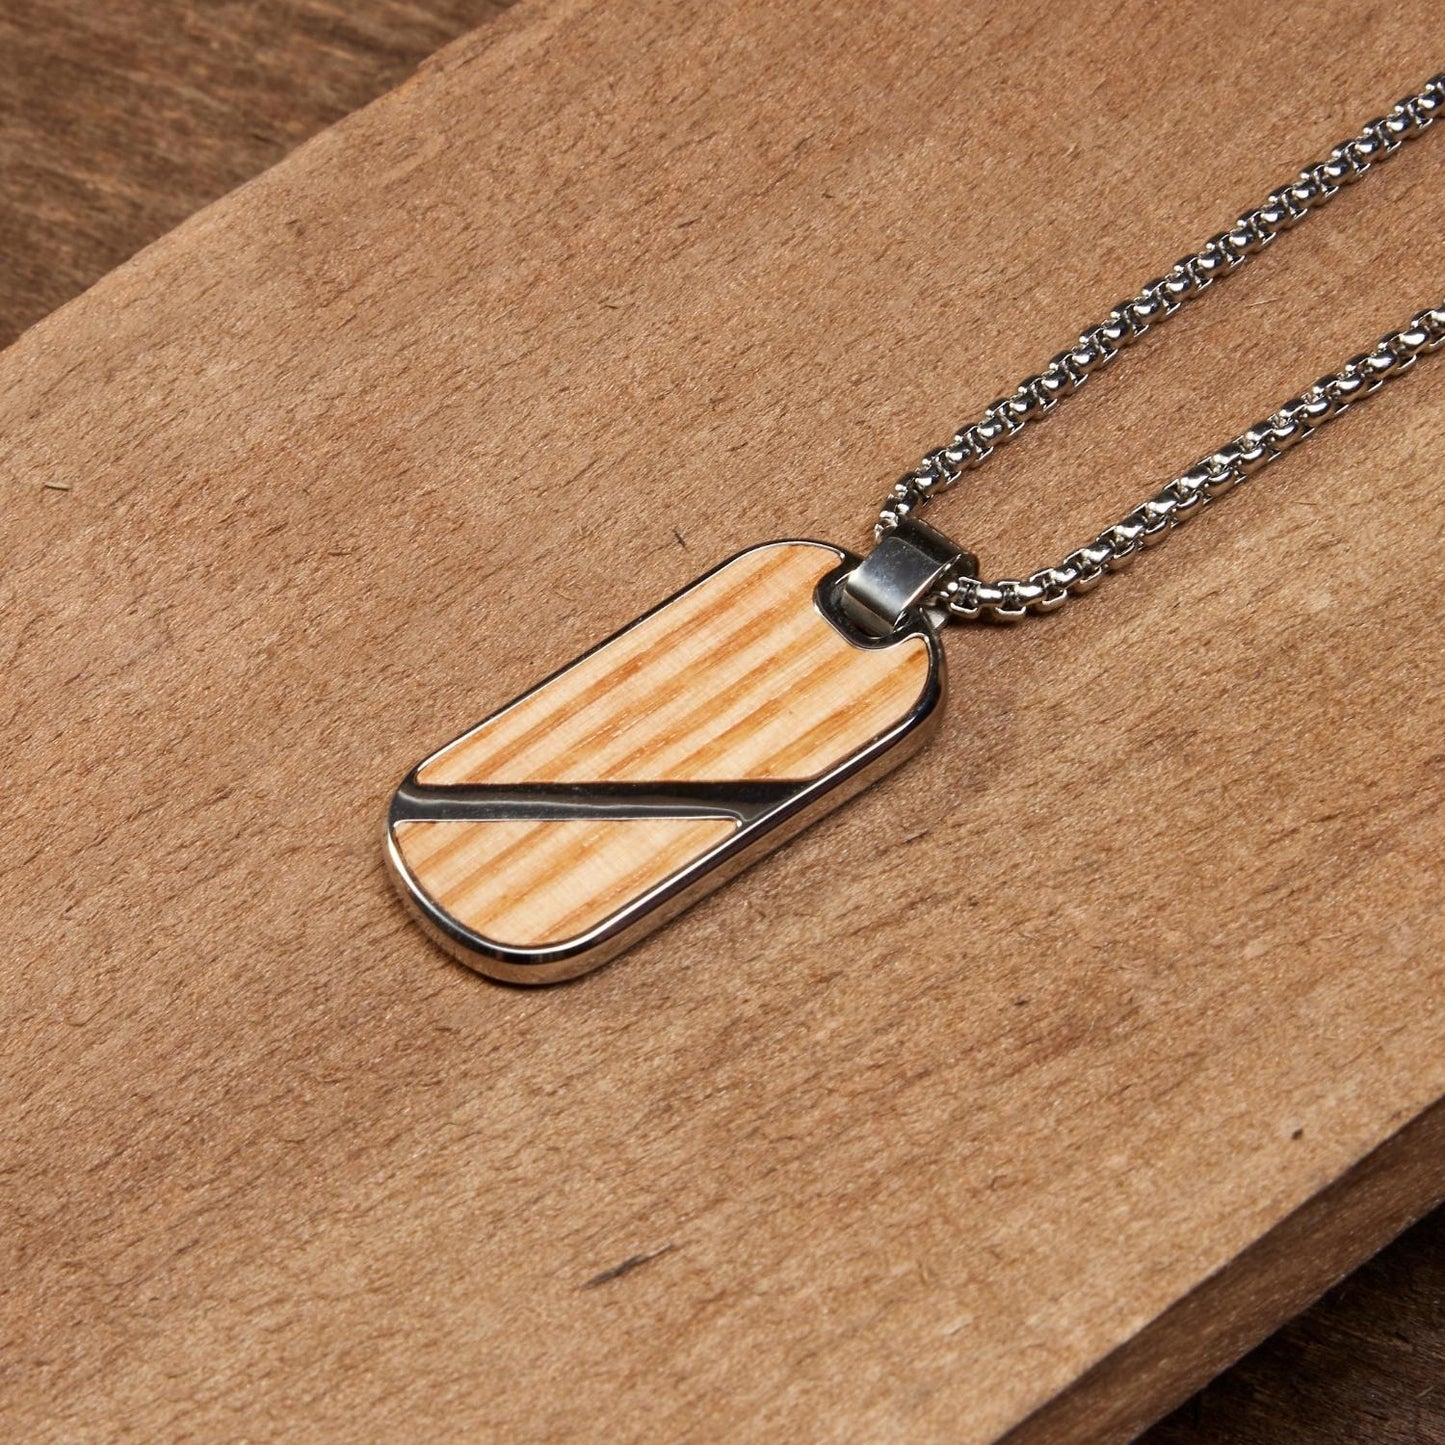 Brewmaster Silver Pendant Necklace